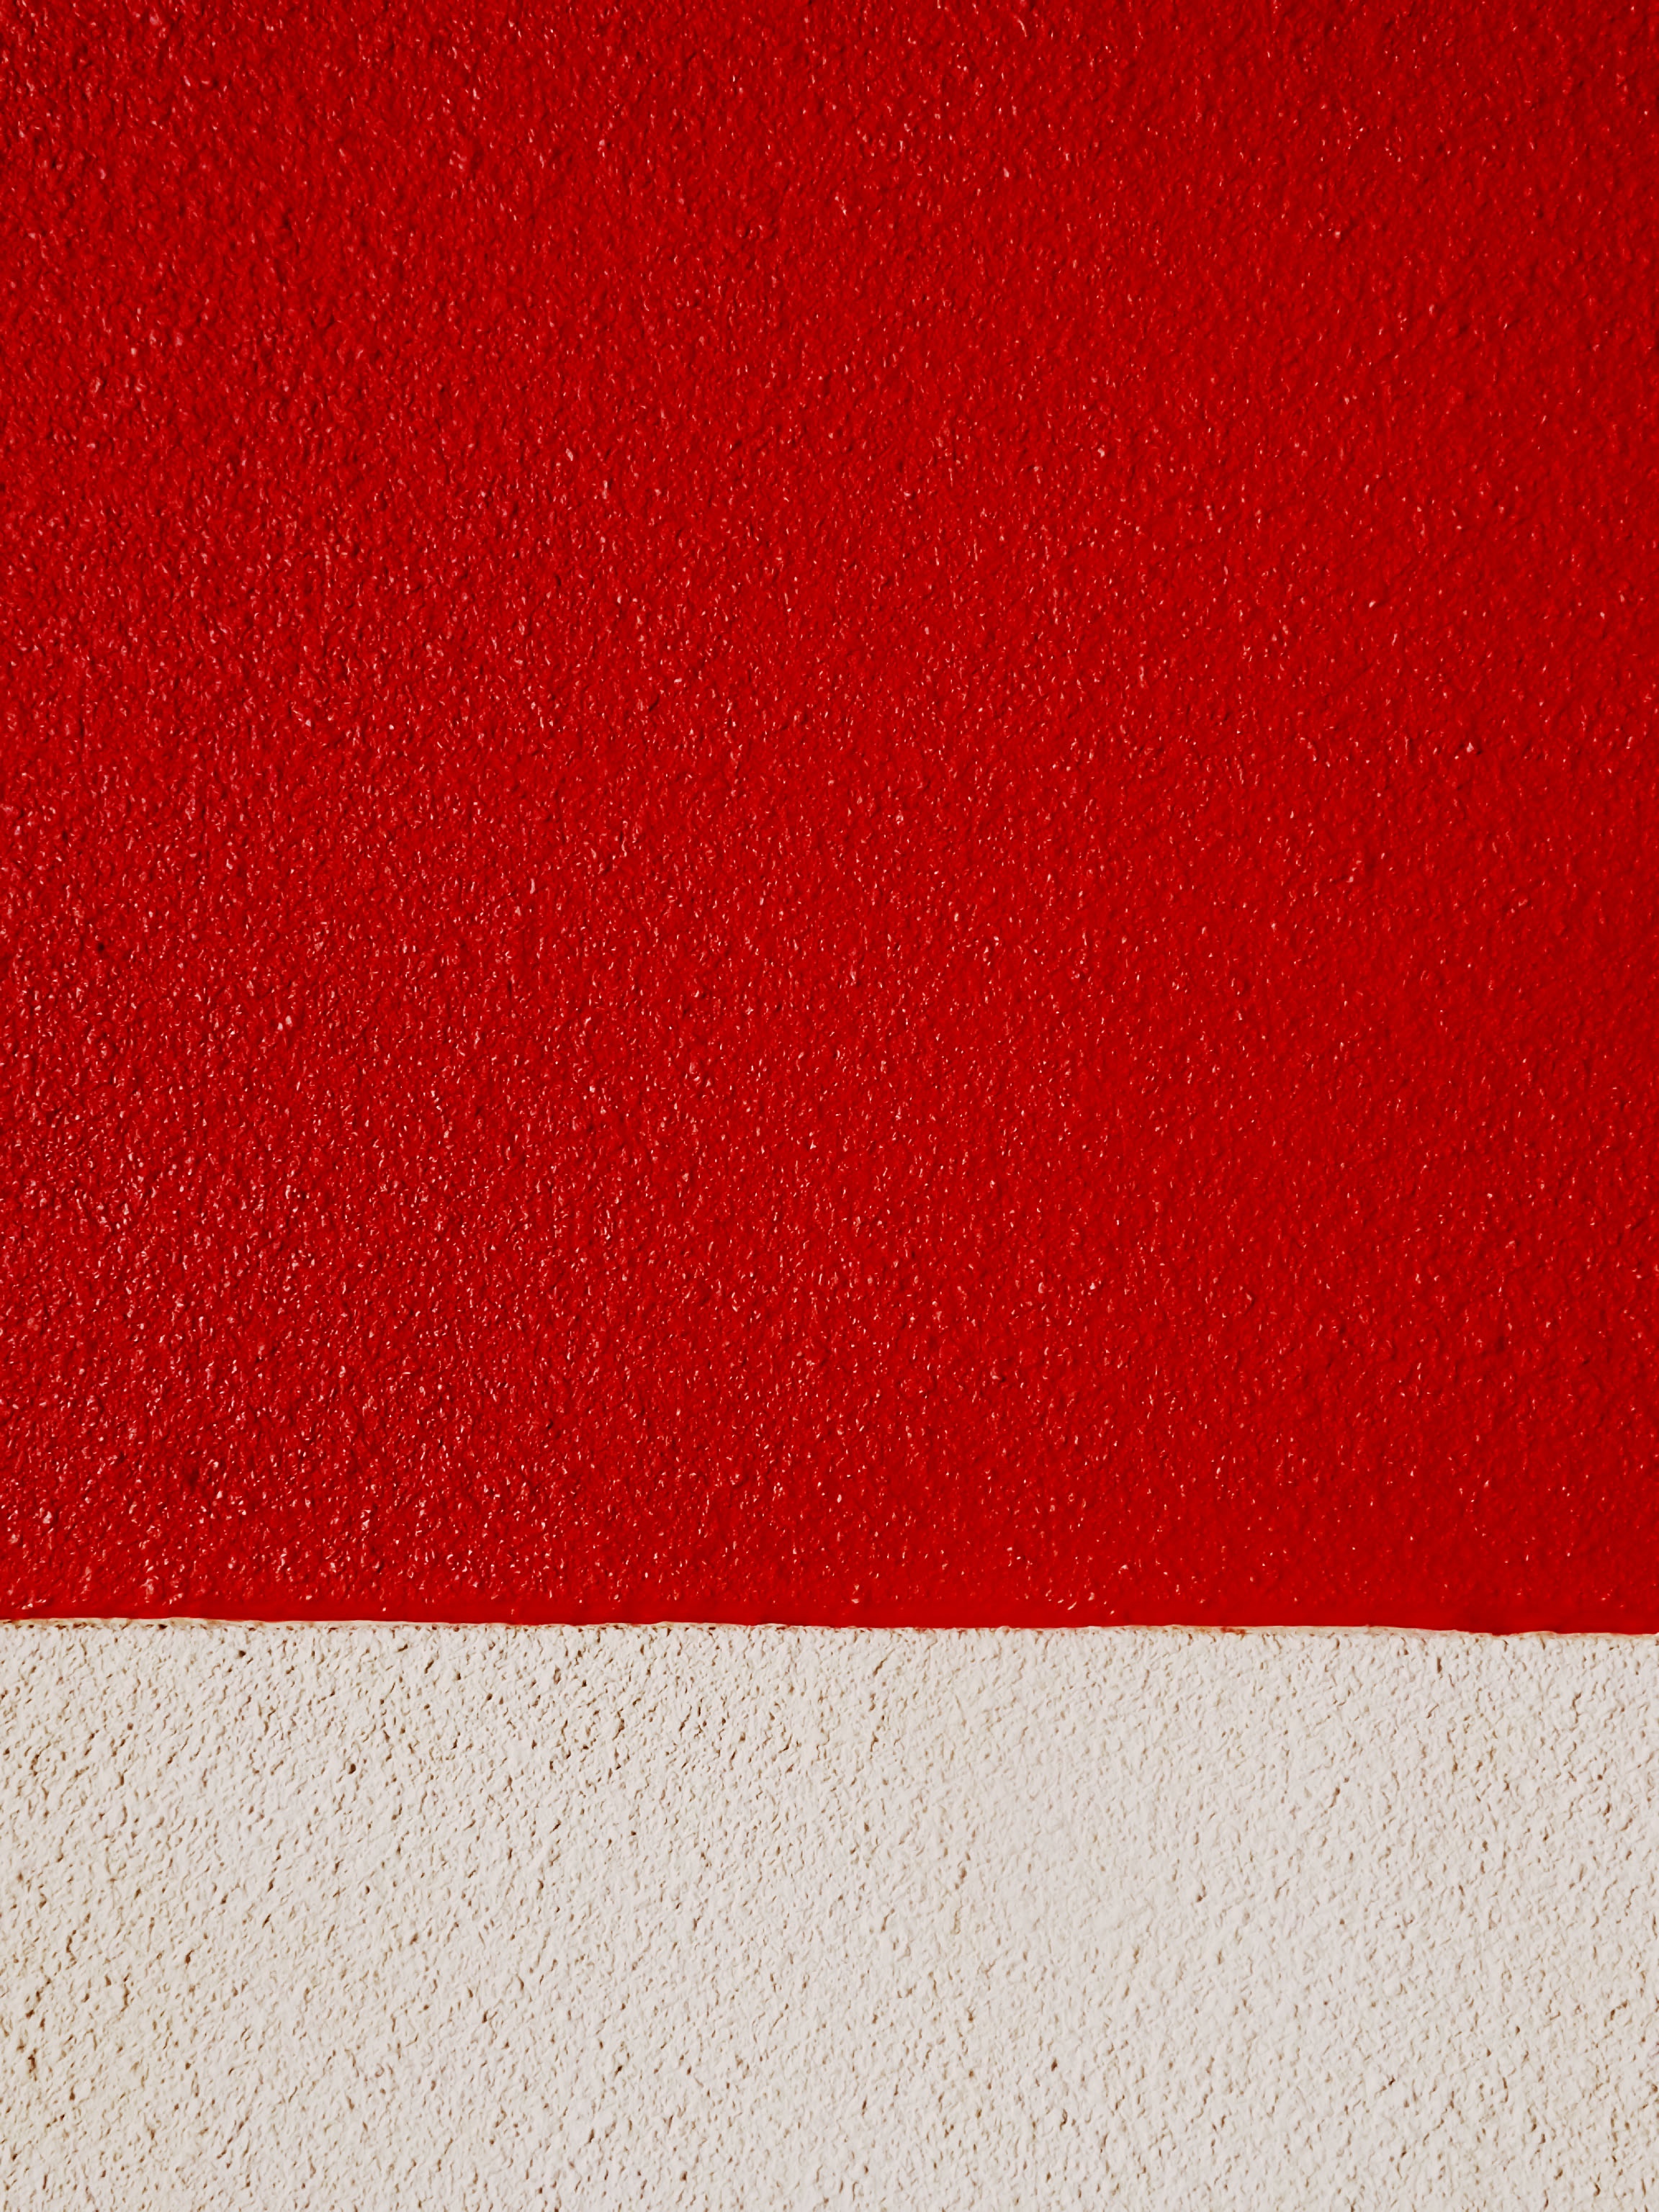 1920 x 1080 picture texture, paint, red, textures, wall, rough